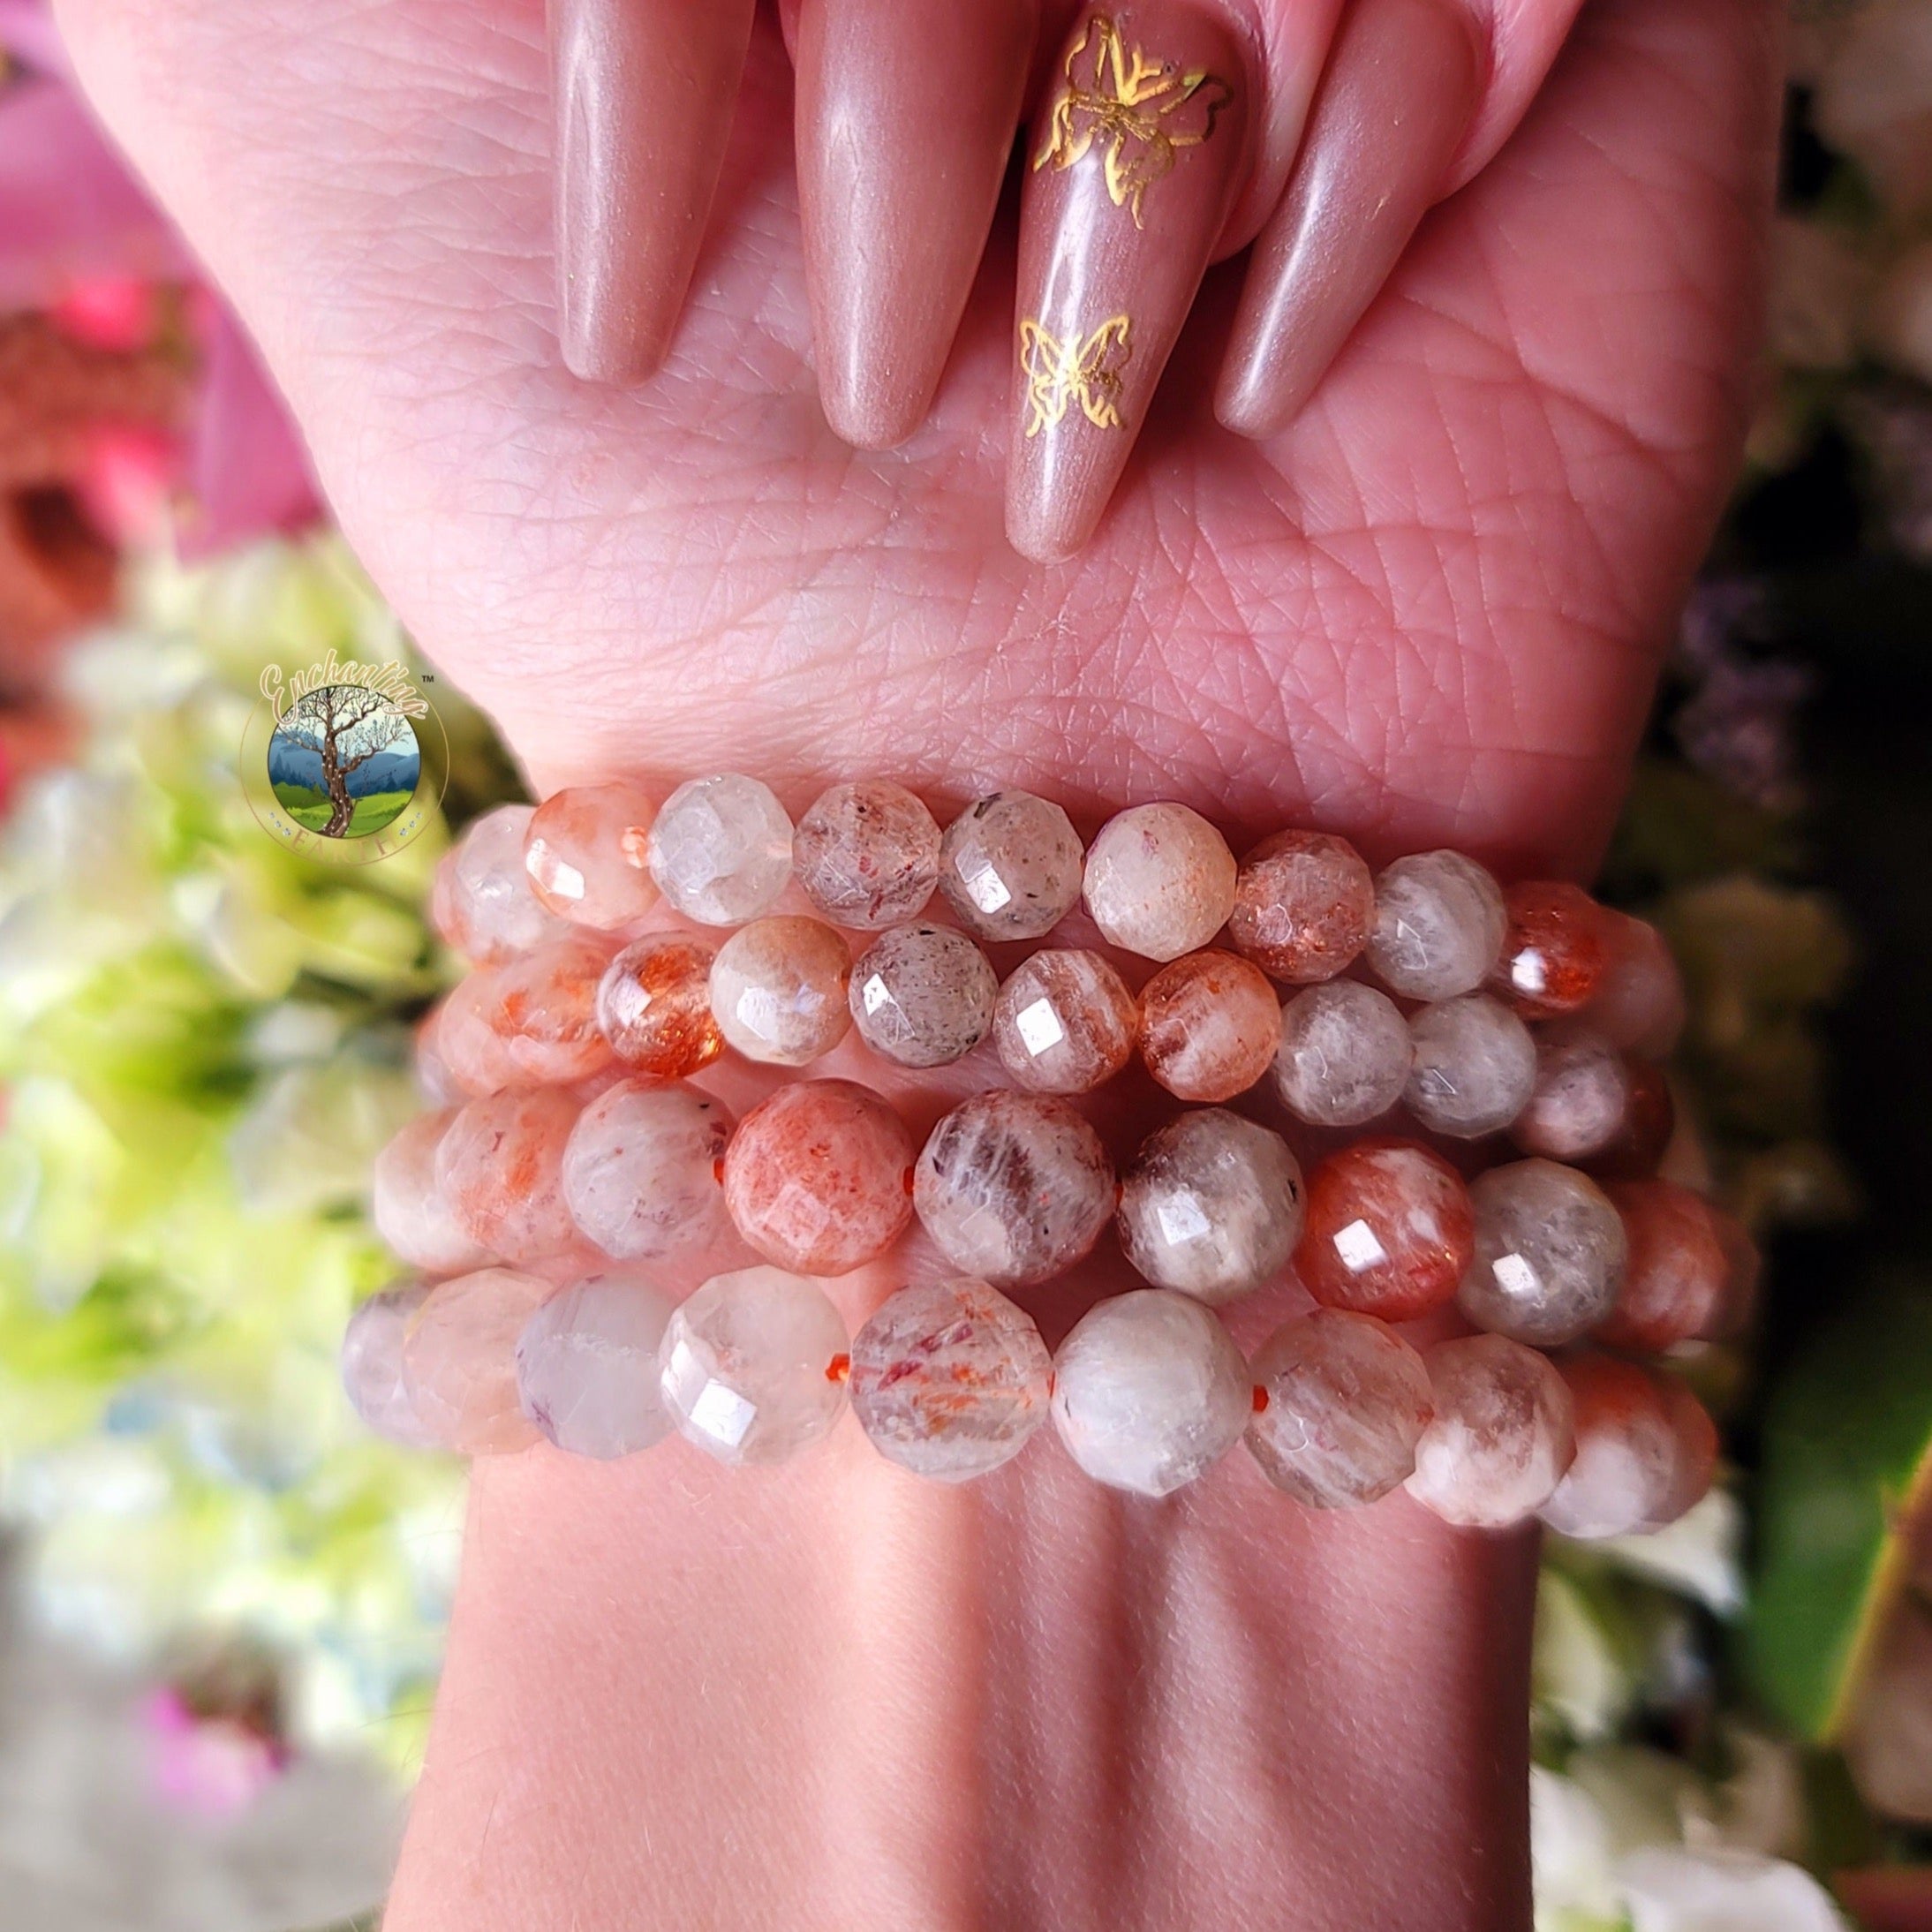 Sunstone with Moonstone Faceted Bracelet for Creativity, Confidence and New Beginnings